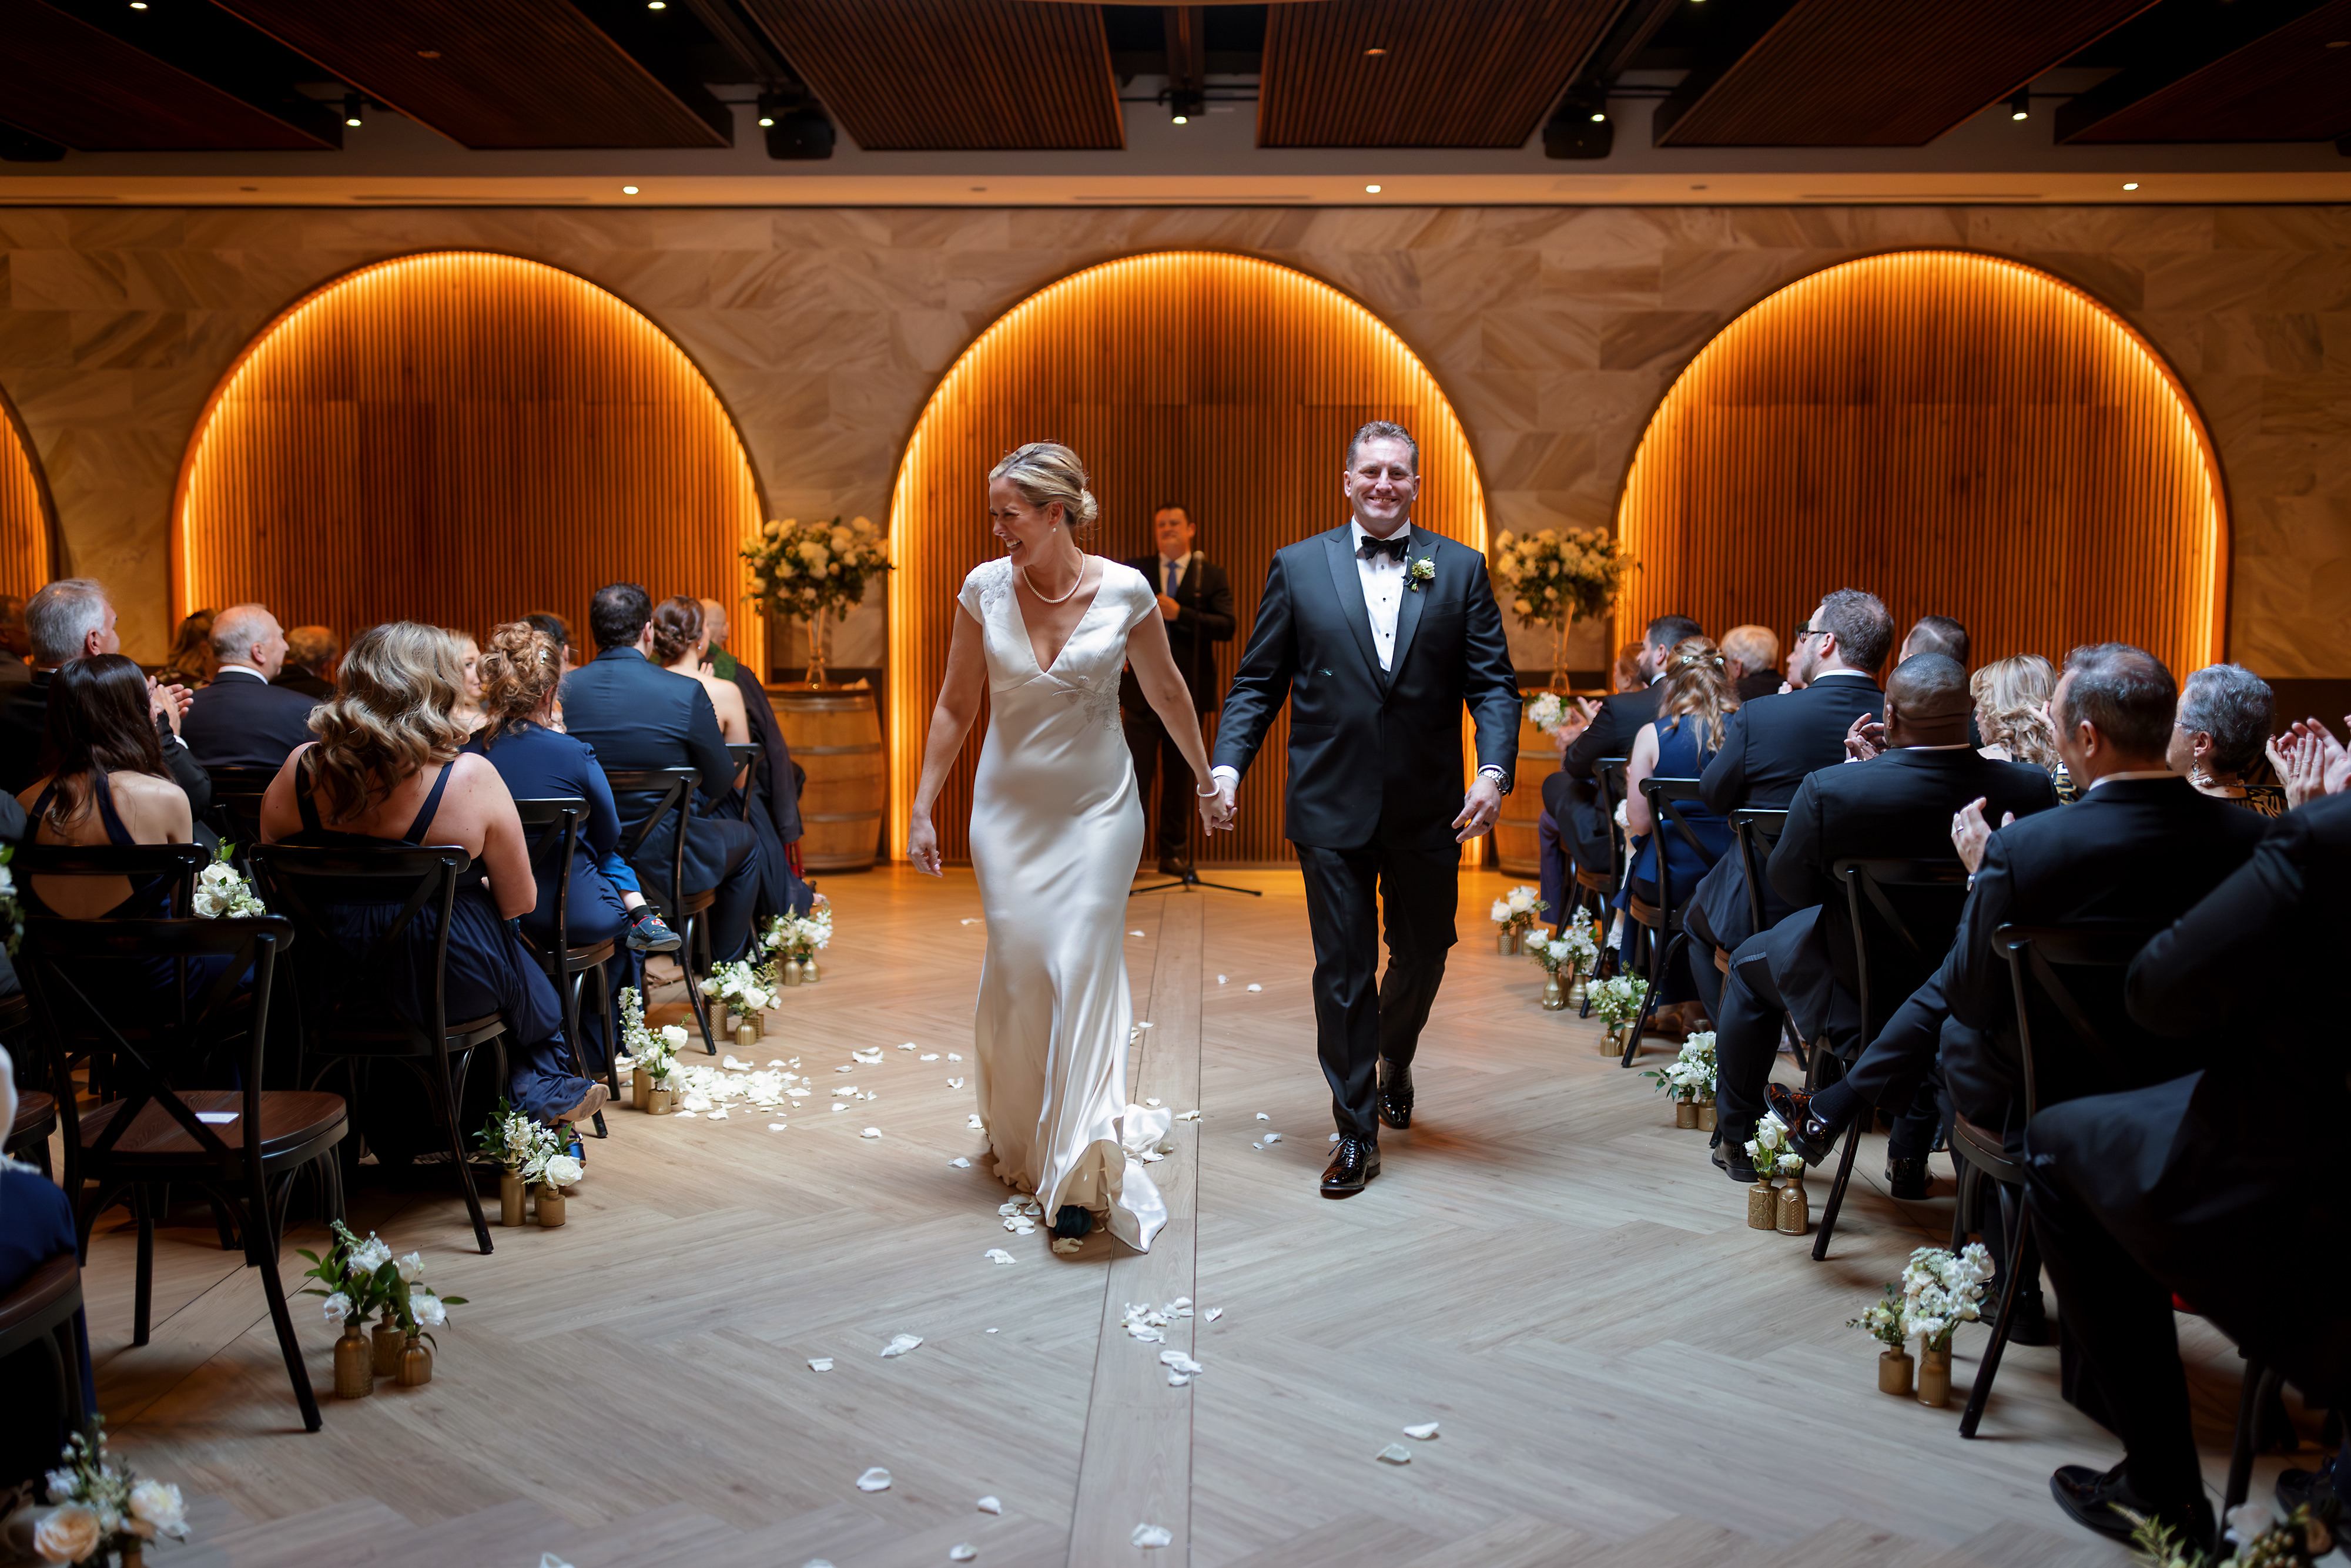 Bride and groom walk back down the aisle after wedding ceremony at Chicago Winery